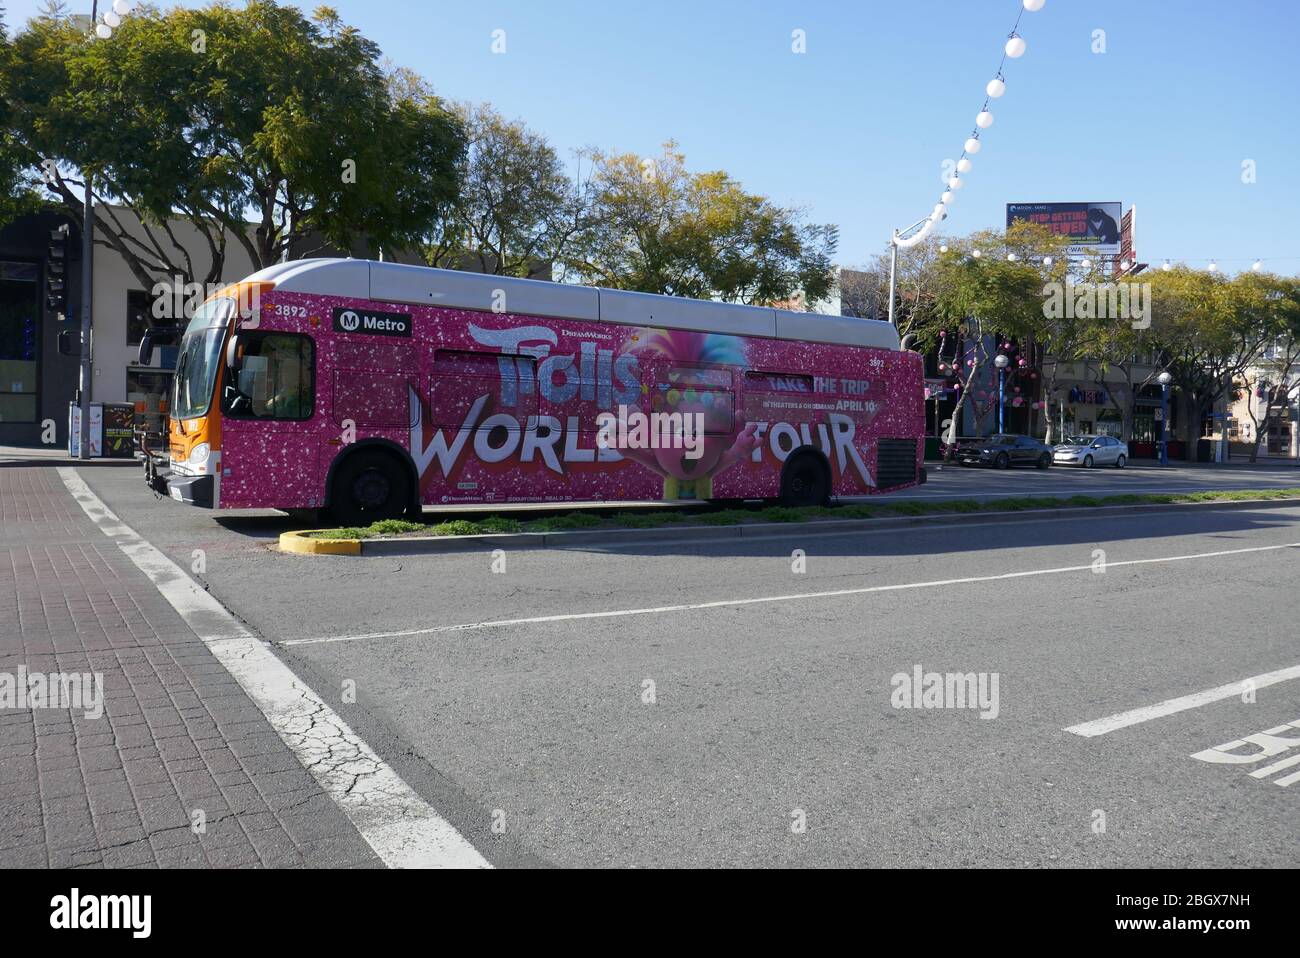 Los Angeles, California, USA 22nd April 2020 A general view of atmosphere of Trolls World Tour Bus during the coronavirus Covid-19 pandemic on April 22, 2020 in Los Angeles, California, USA. Photo by Barry King/Alamy Stock Photo Stock Photo